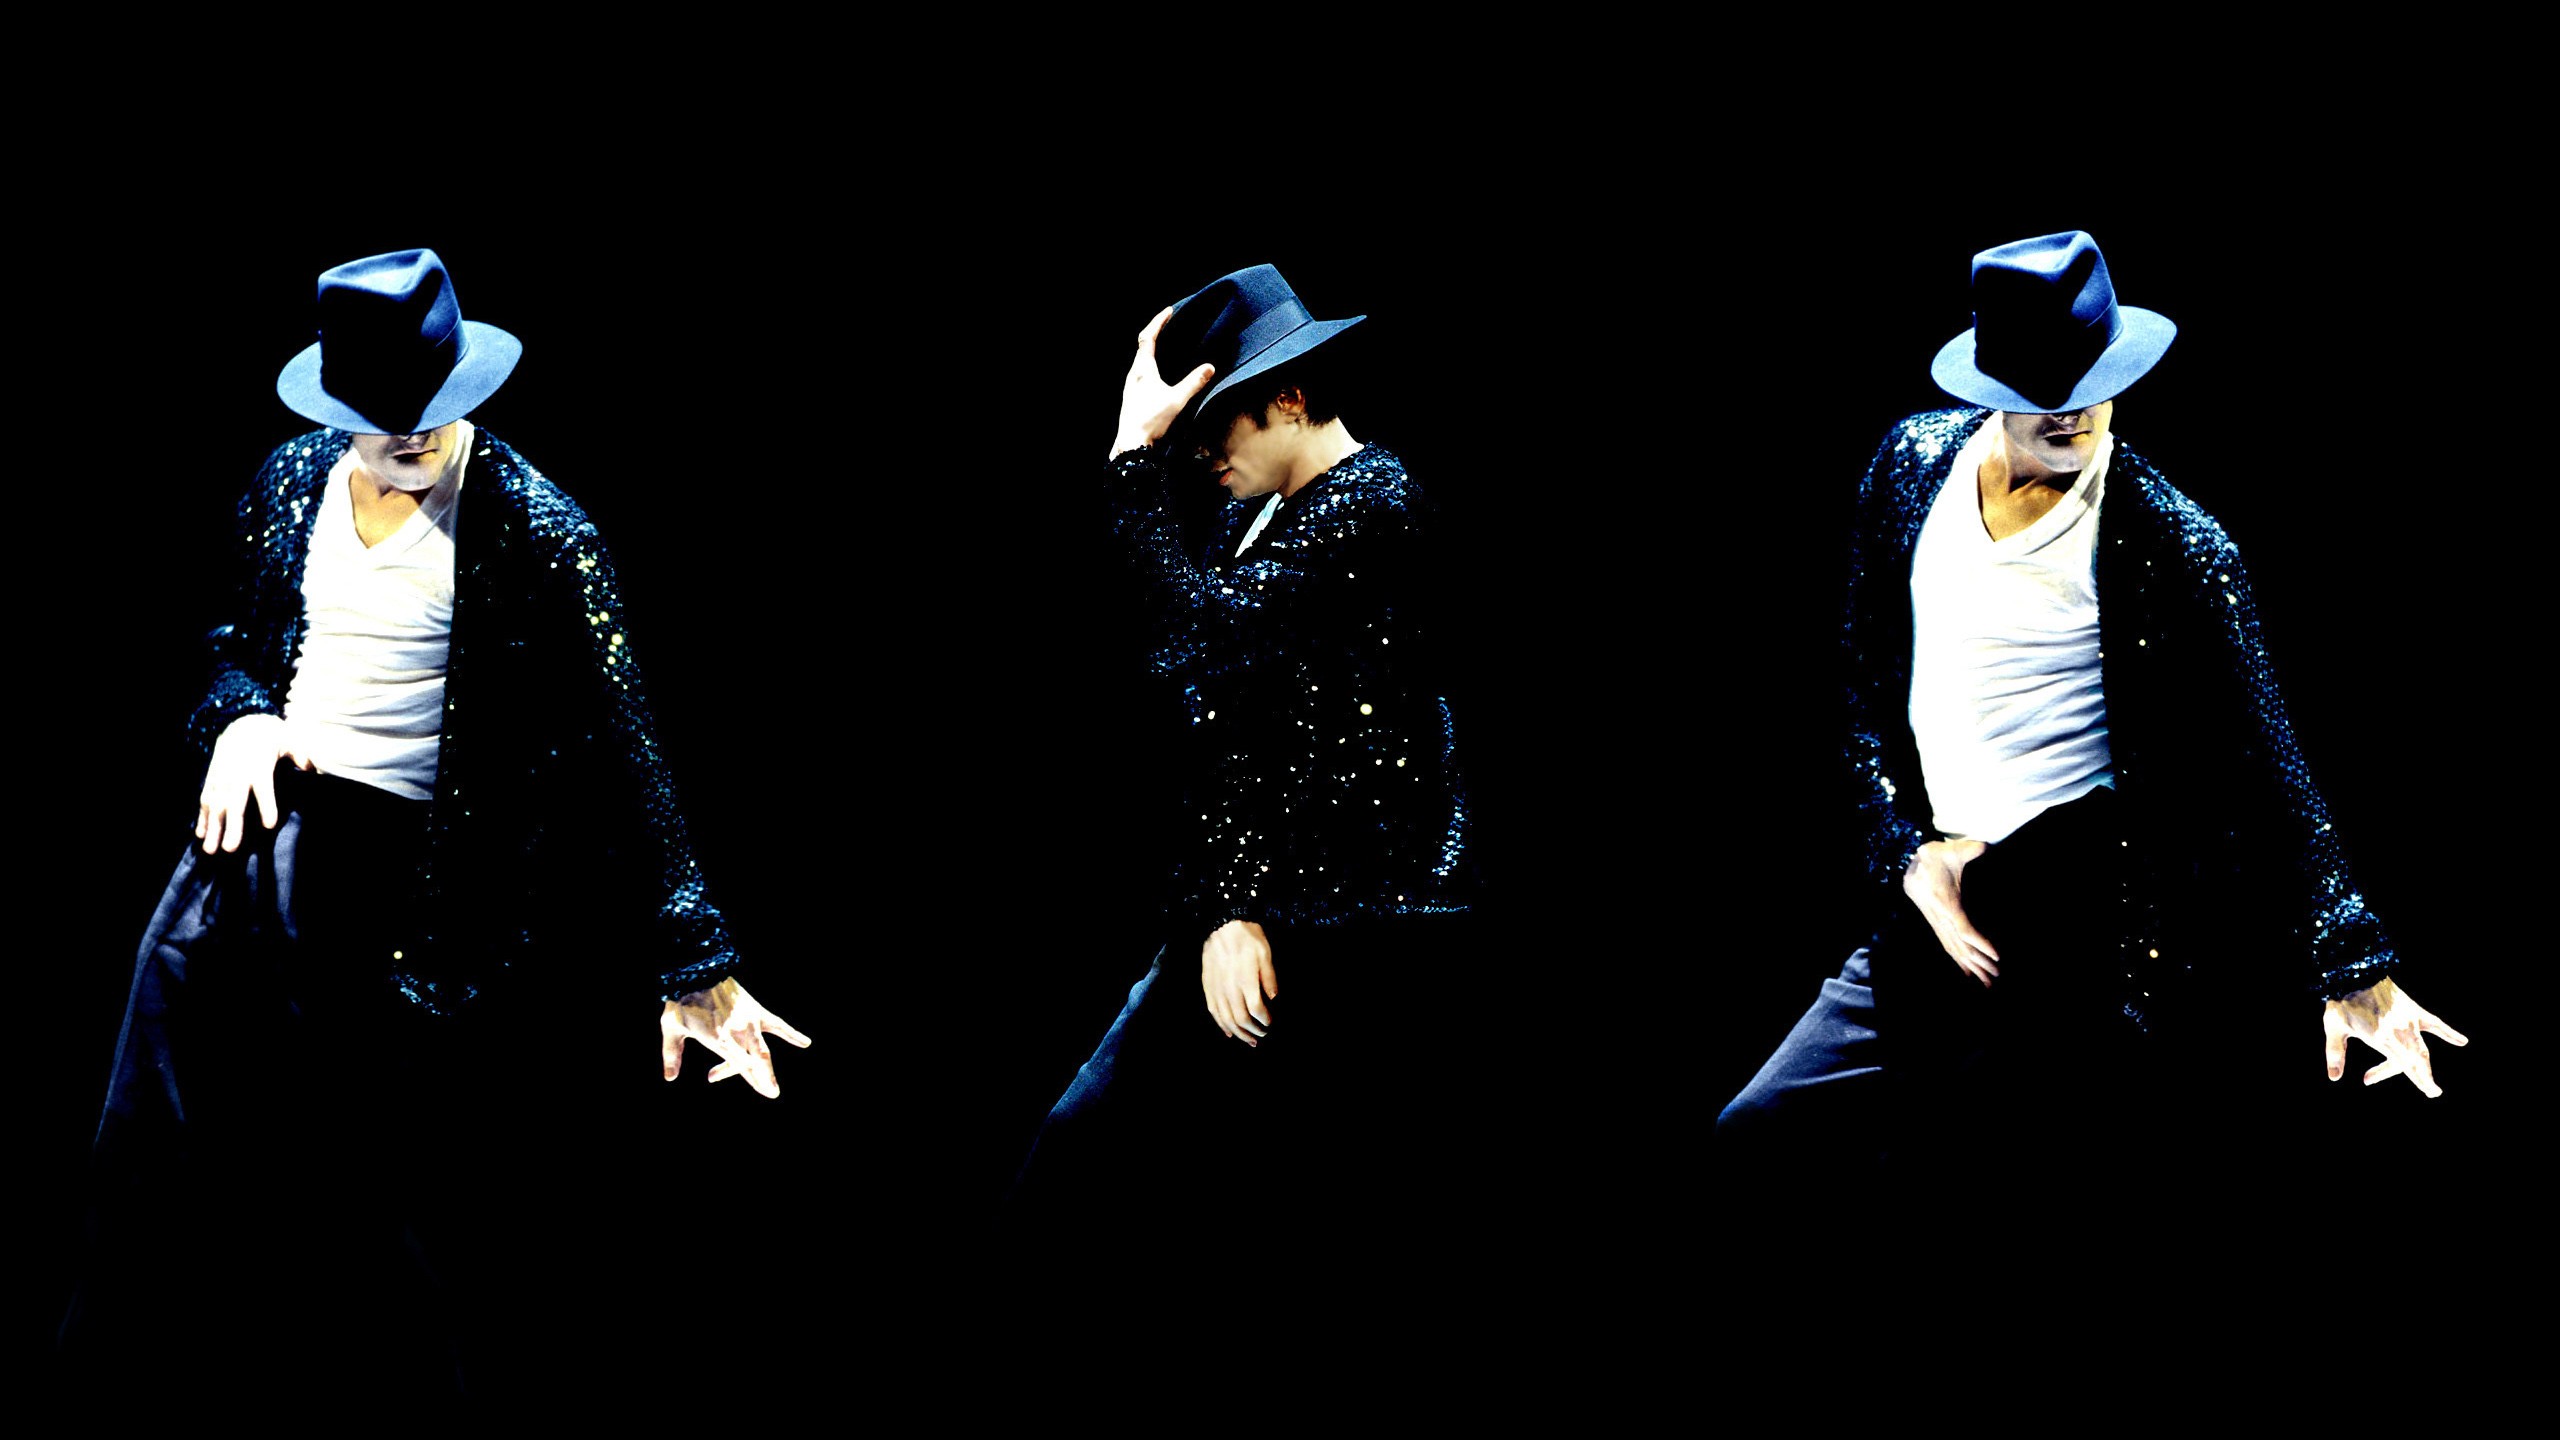 Michael Jackson Doing Dance Hd Celebrities 4k Wallpapers Images Backgrounds Photos And Pictures